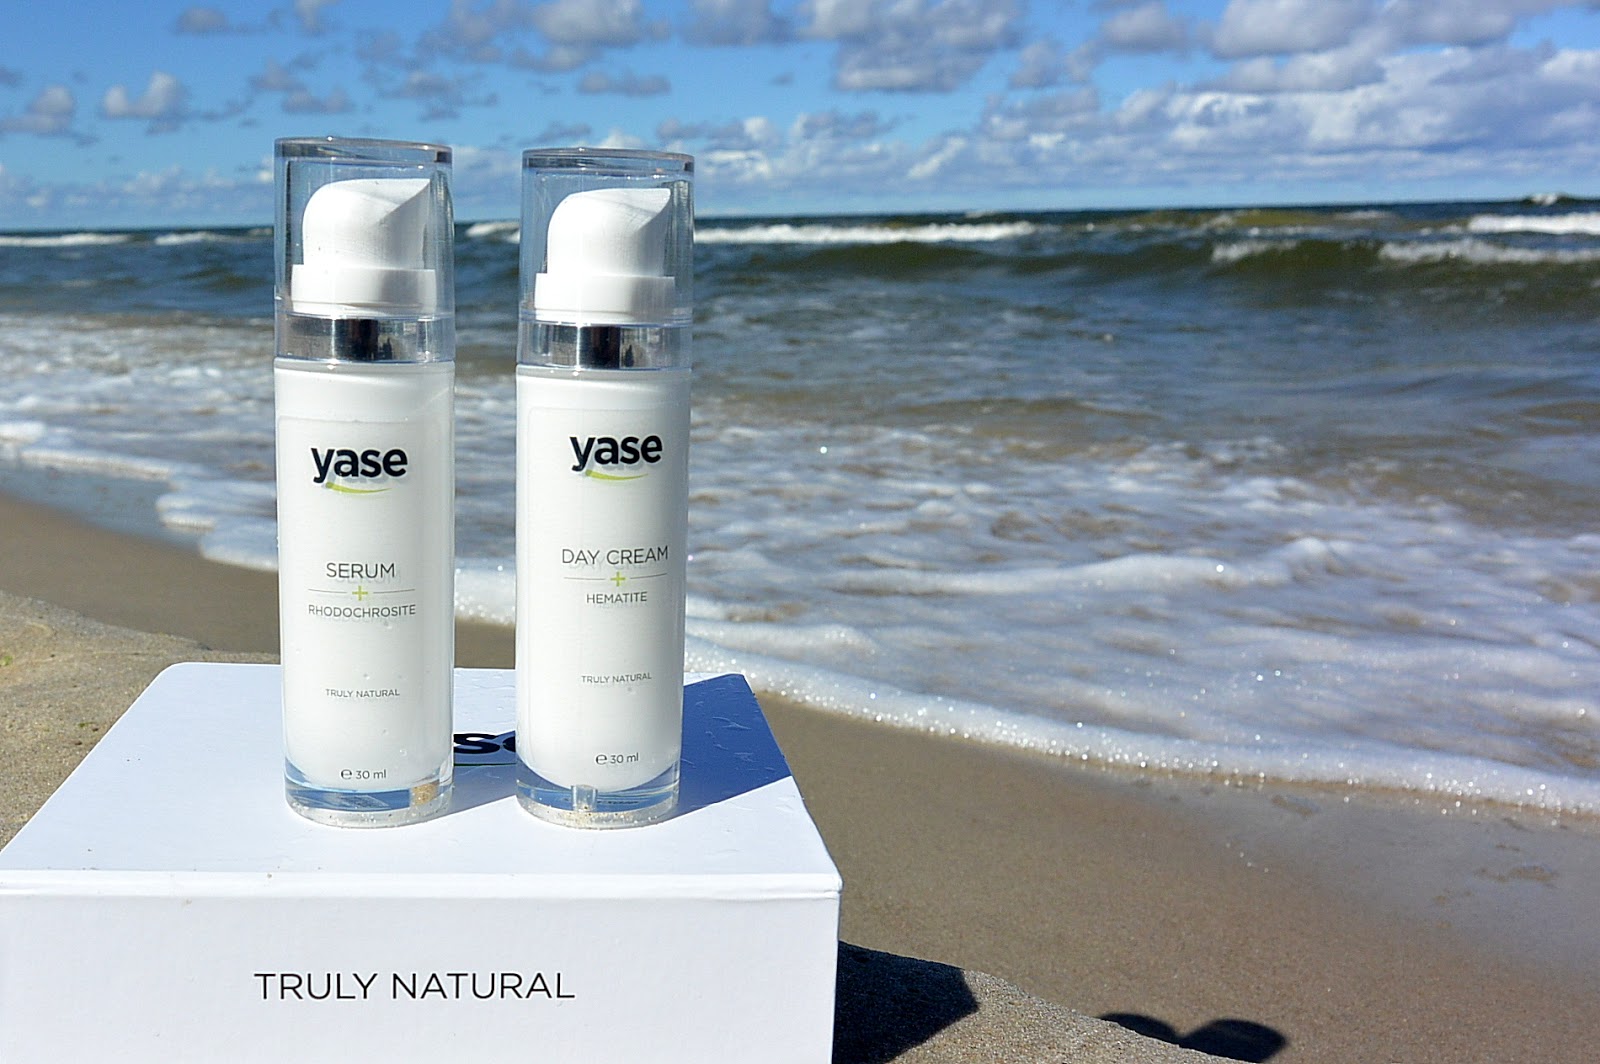 TRULY NATURAL | Yase Cosmetics